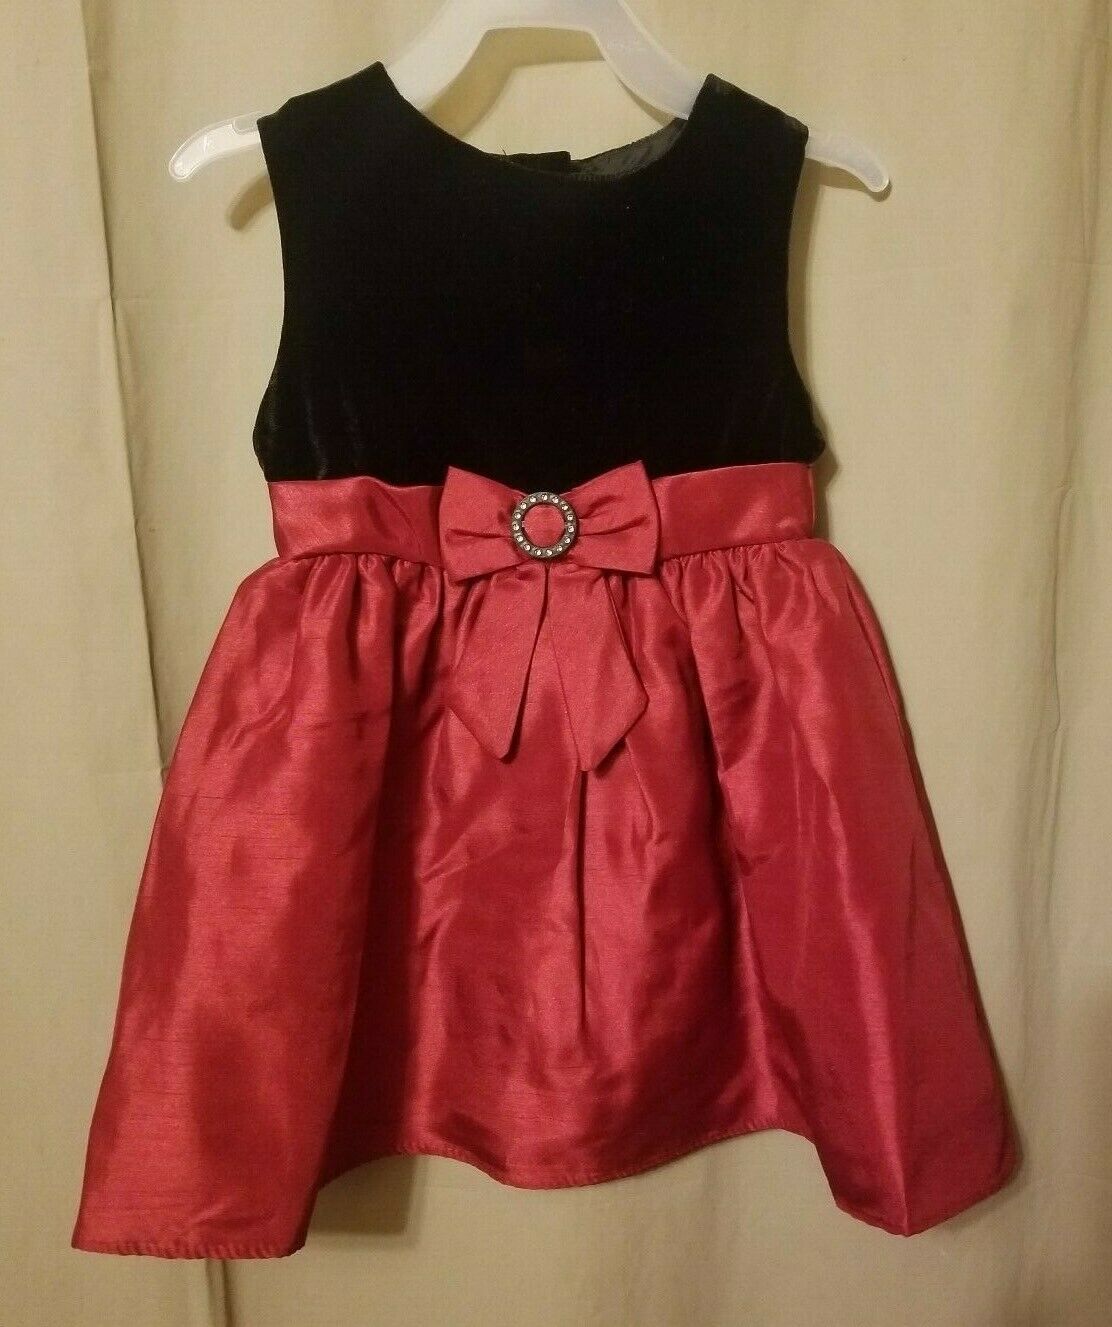 Primary image for Perfectly Dressed - Black and Red Dress Size 24M    NWT    B3